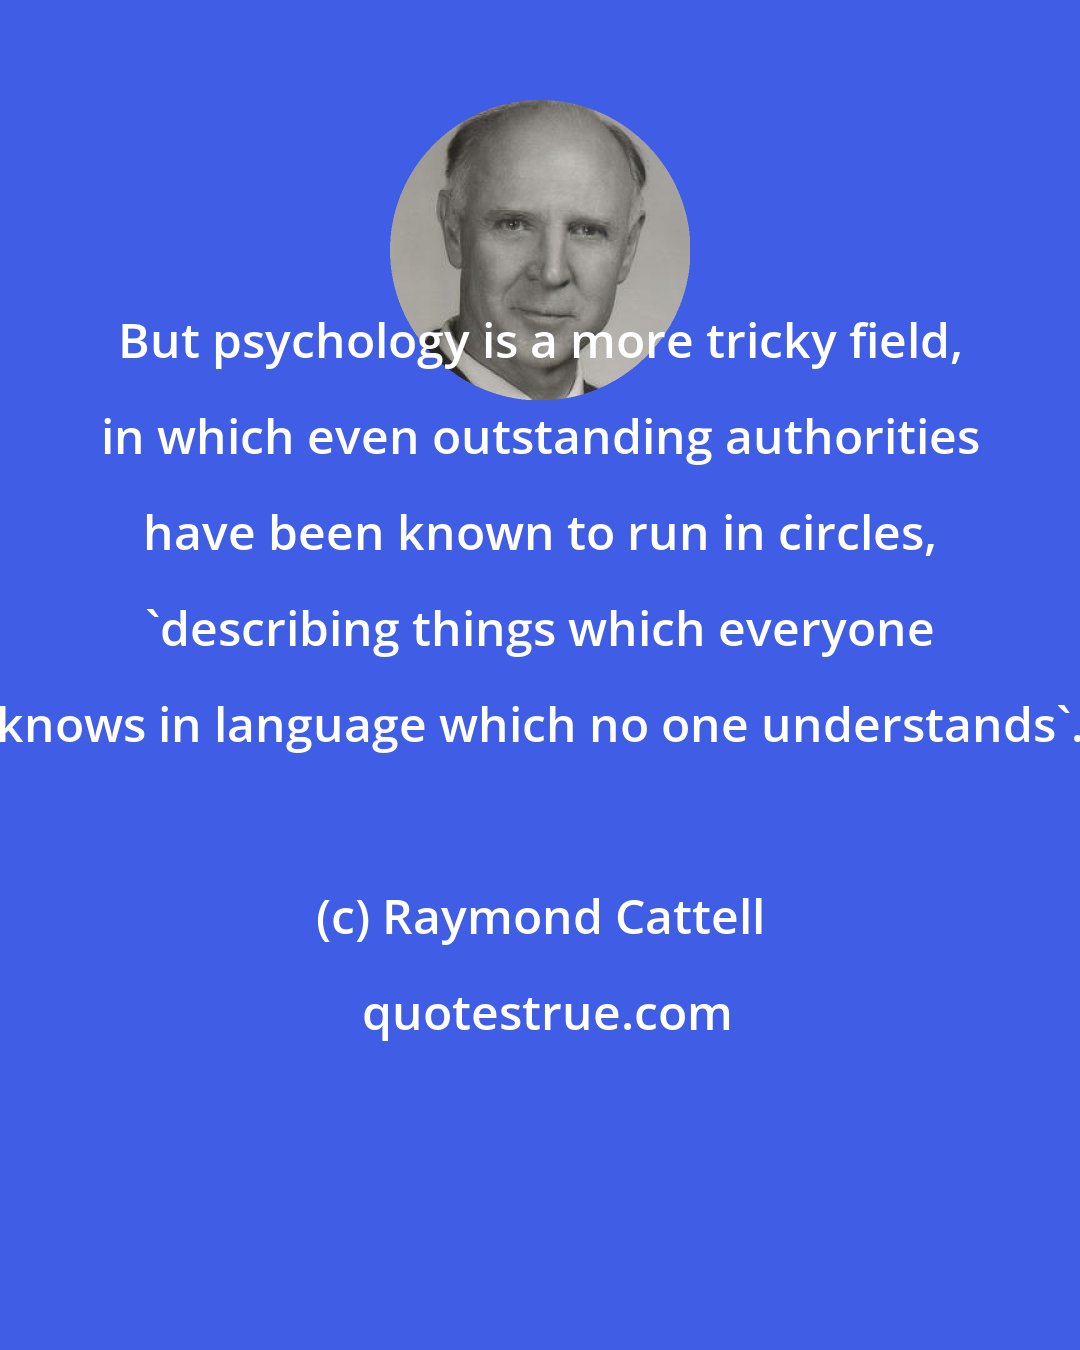 Raymond Cattell: But psychology is a more tricky field, in which even outstanding authorities have been known to run in circles, 'describing things which everyone knows in language which no one understands'.